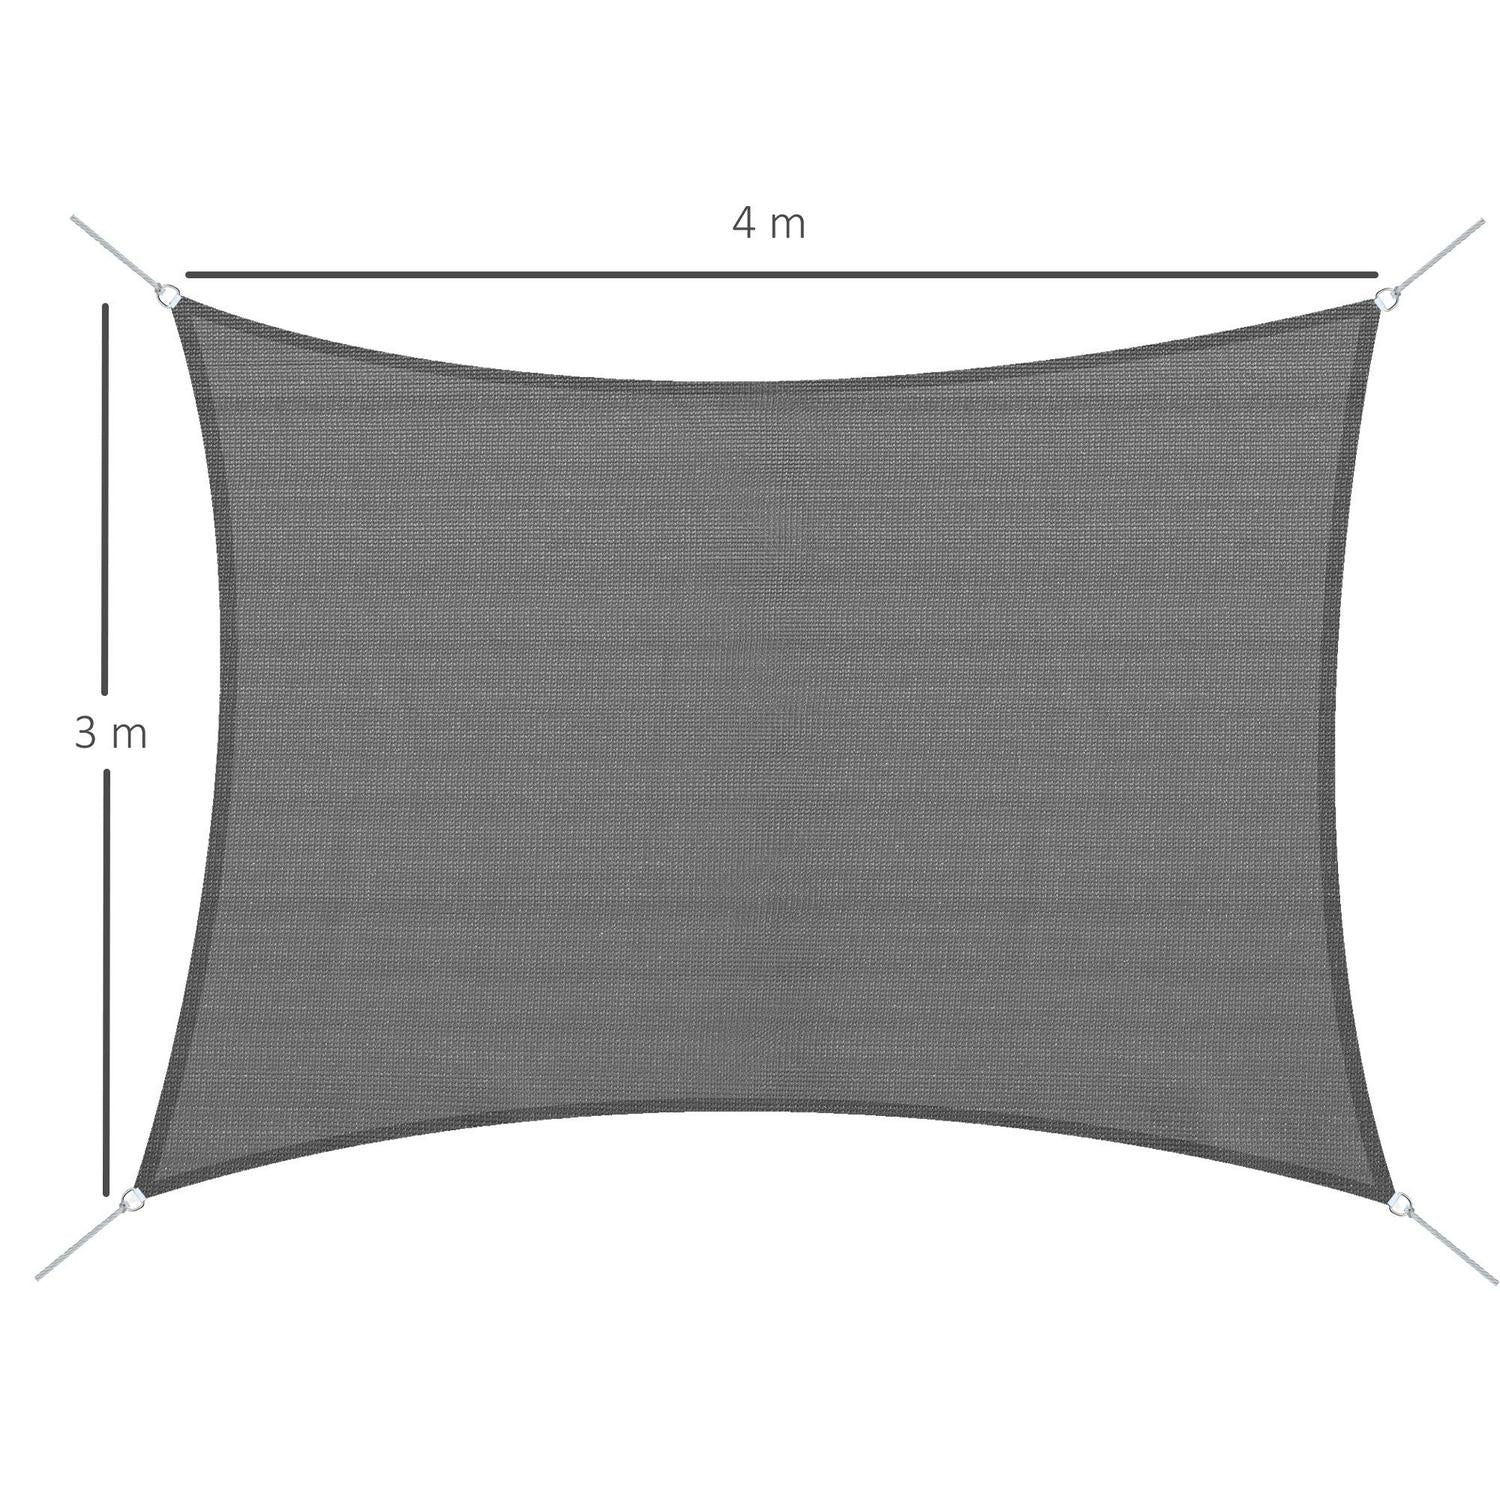 Shade Sail Rectangle Canopy Outdoor Sunscreen Awning - Charcoal Grey